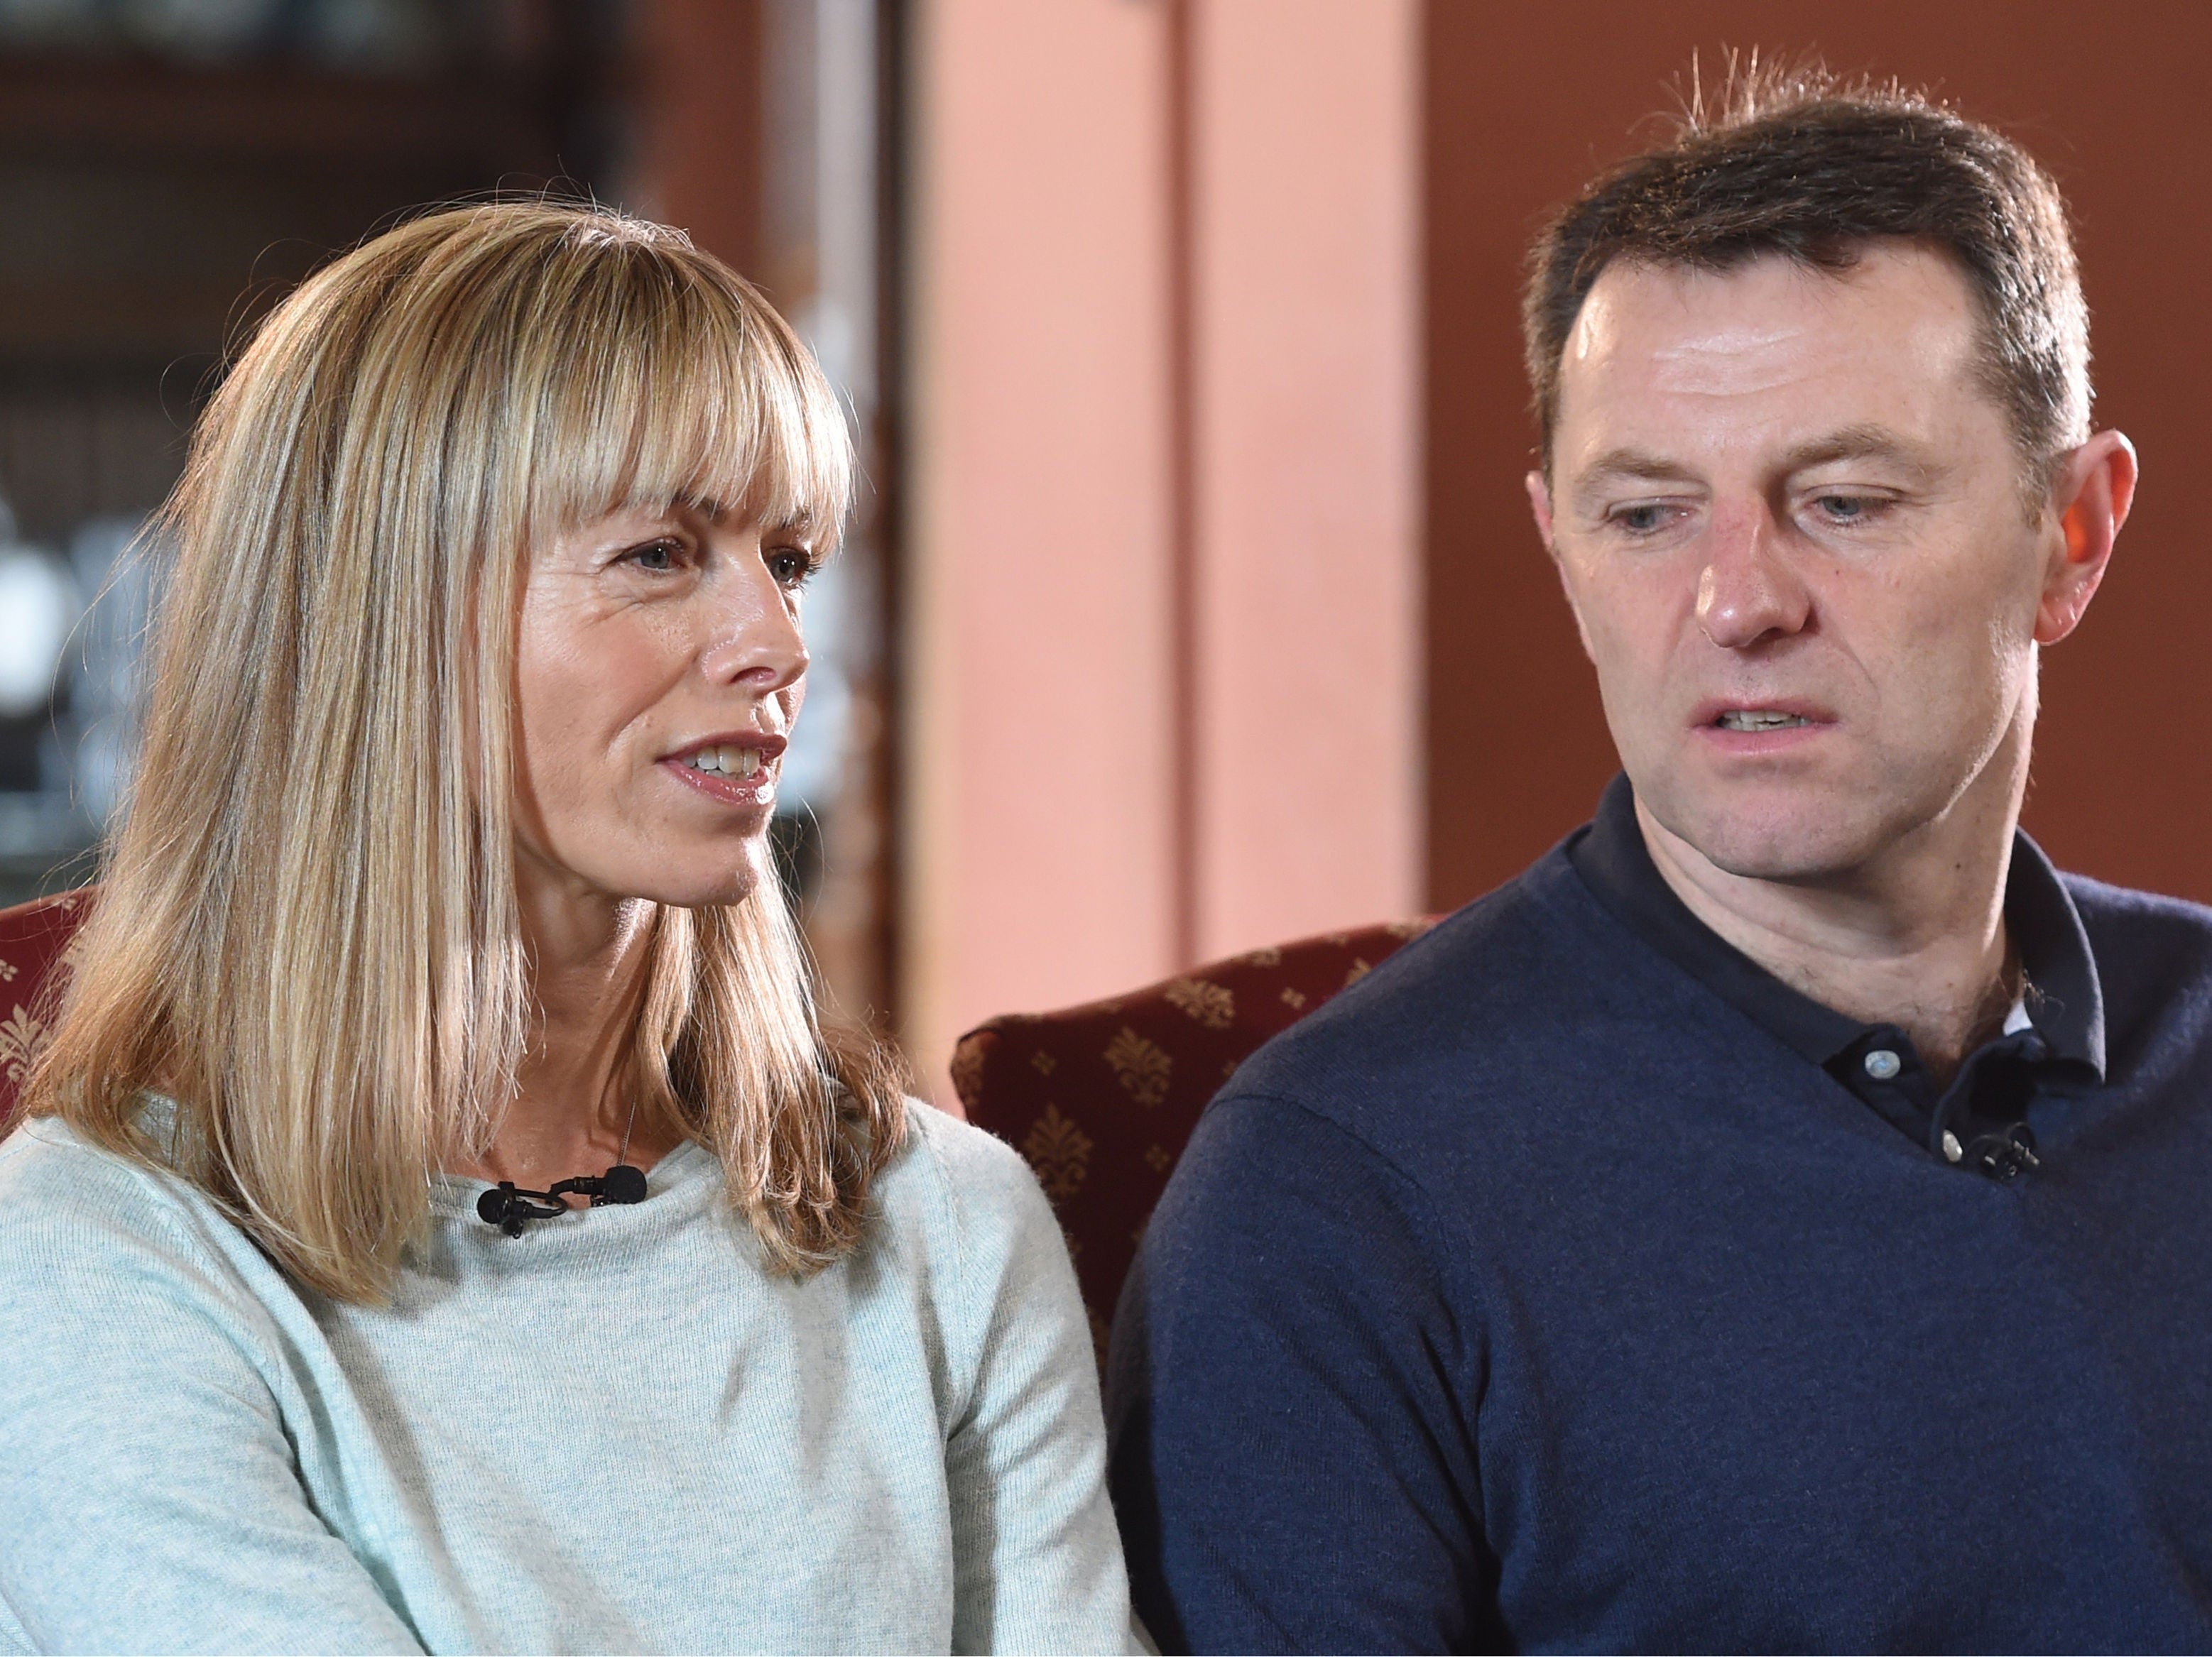 Kate and Gerry McCann have ?750,000 in a fund for a private search if police end the hunt for their missing daughter Madeleine McCann